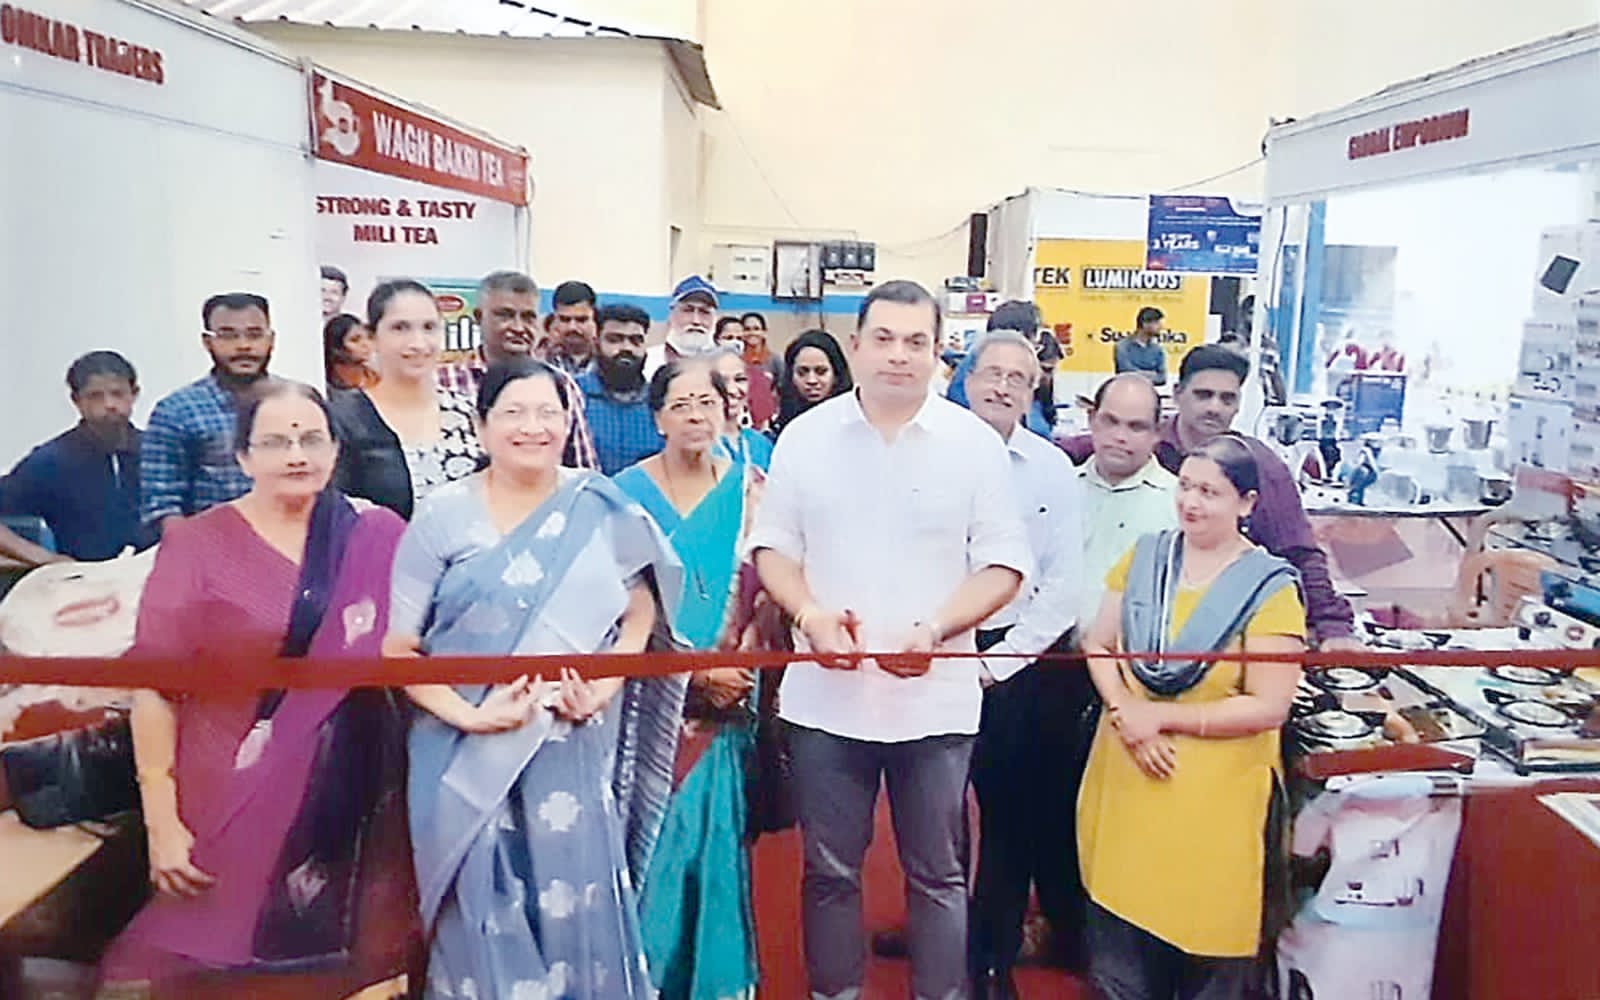 ﻿‘Consumers Shoppee’ exhibition inaugurated